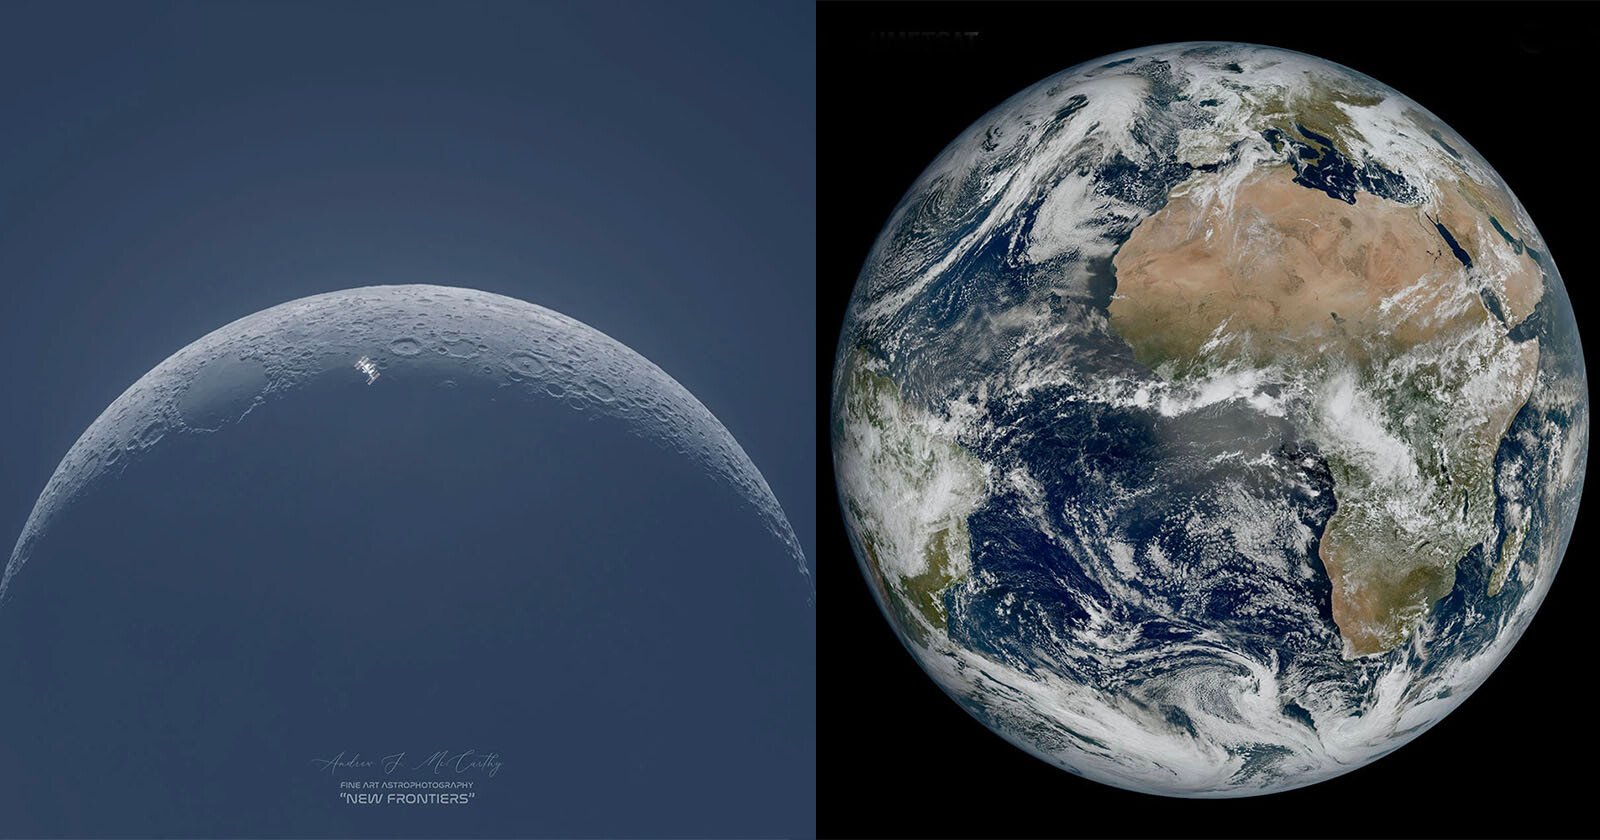 The ISS transiting across the Moon, left, satellite photo of the entire Earth, right.